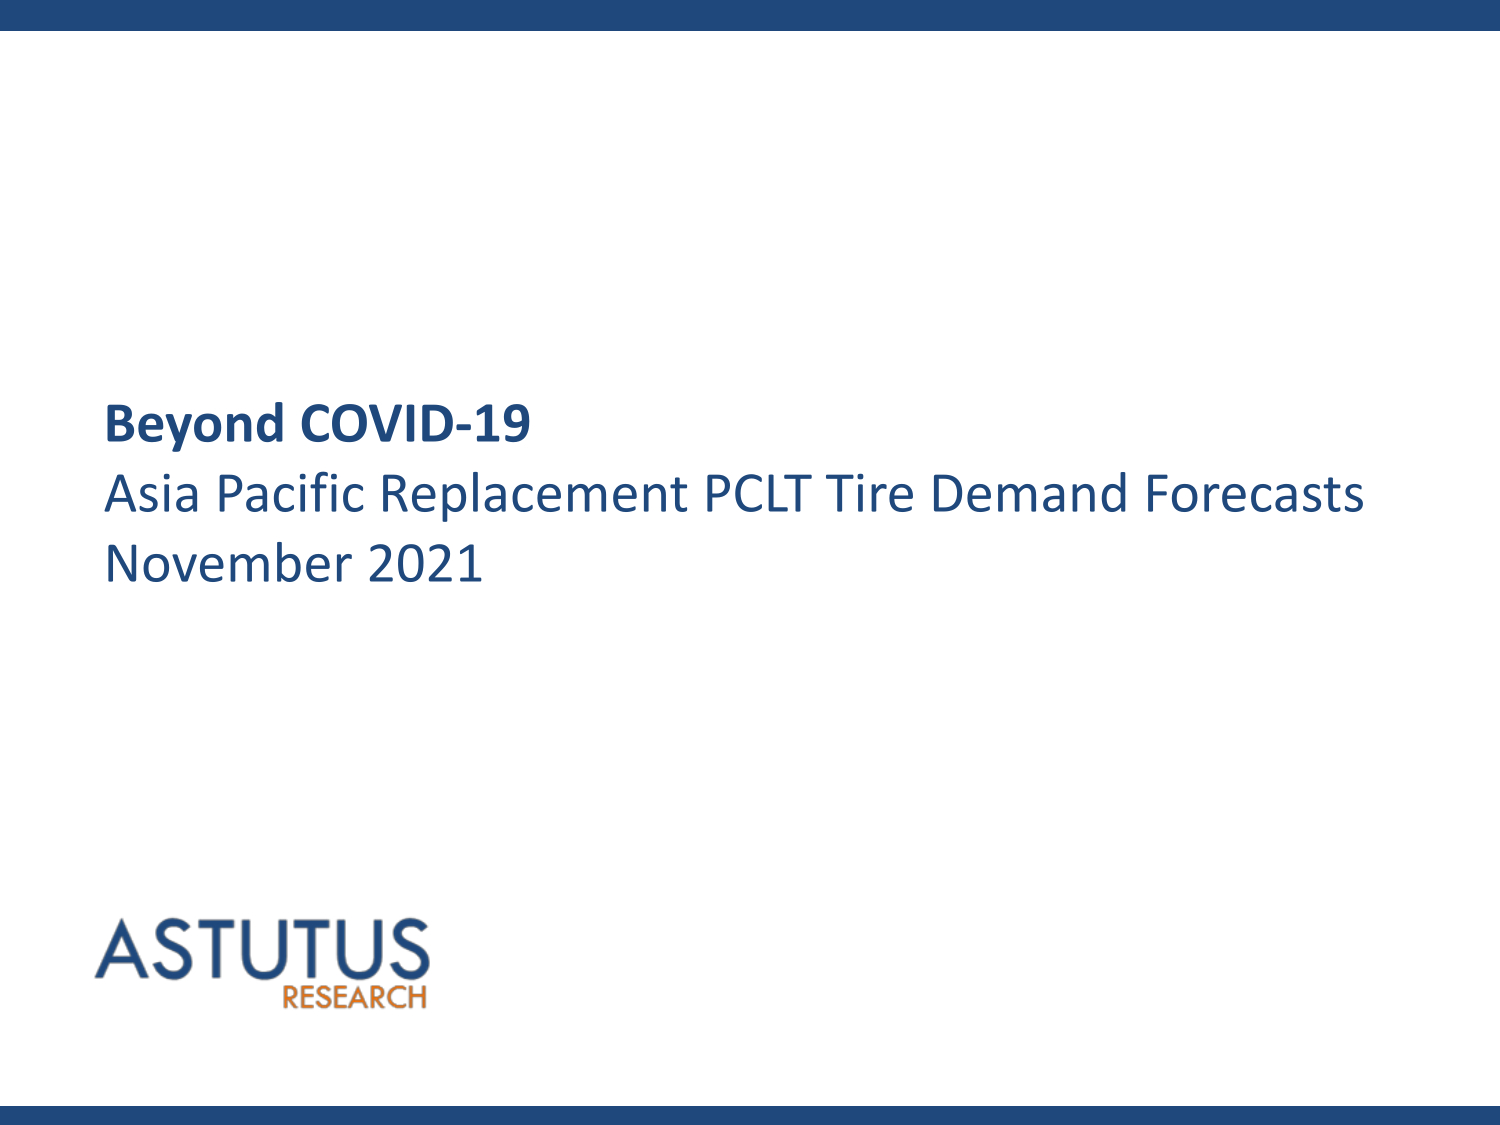 Beyond Covid-19 – Asia Pacific Replacement PCLT Tire Market Forecasts to 2025